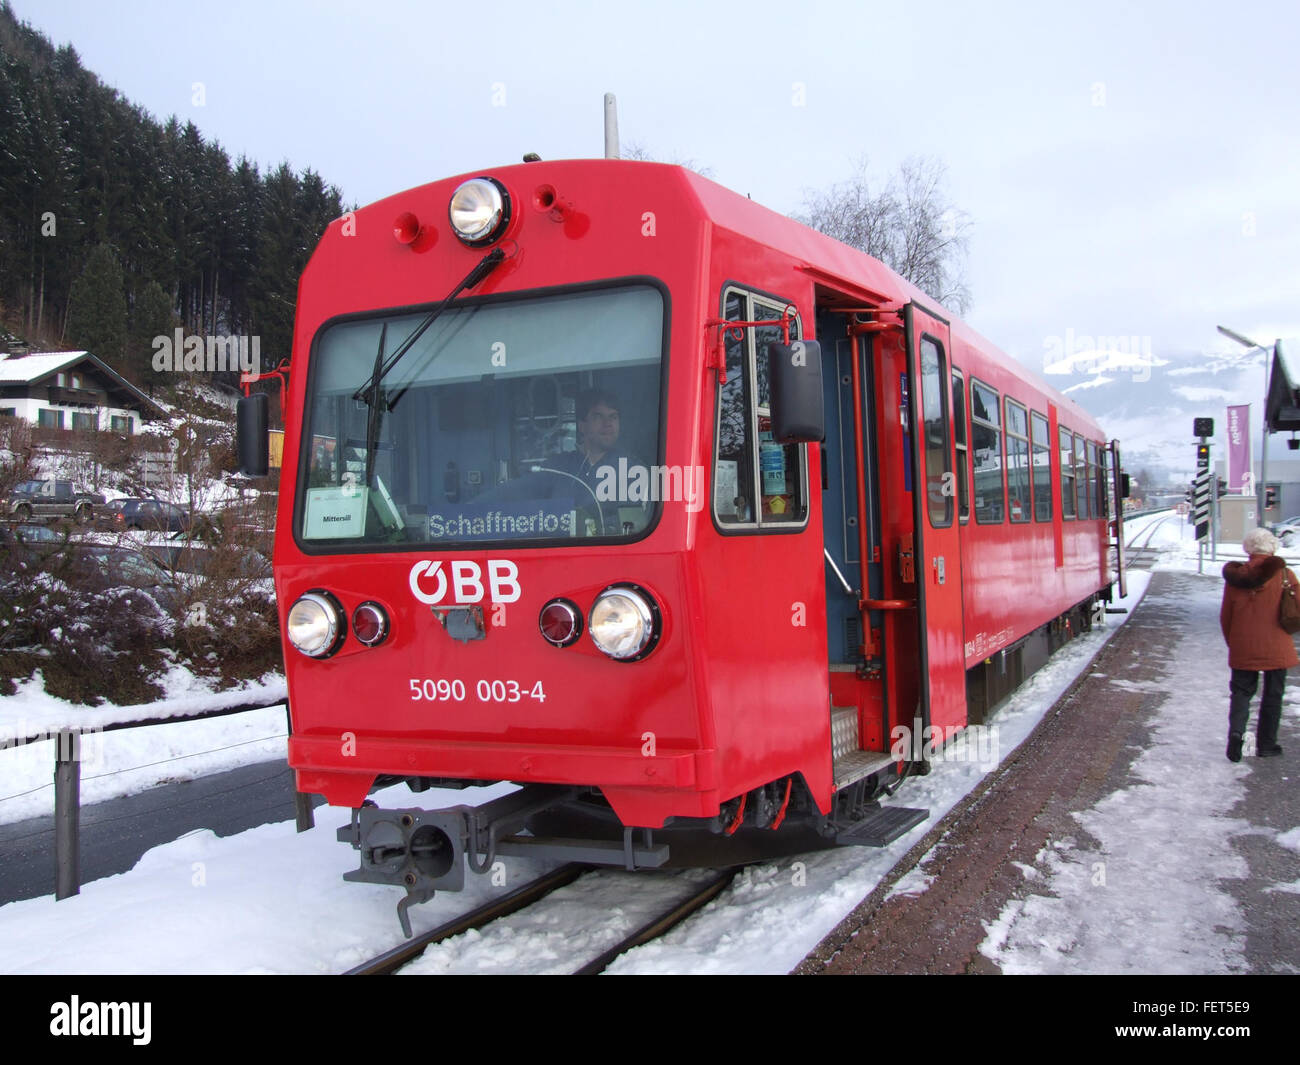 C396BB 5090 treno 003-4 Zell am See pic1 Foto Stock